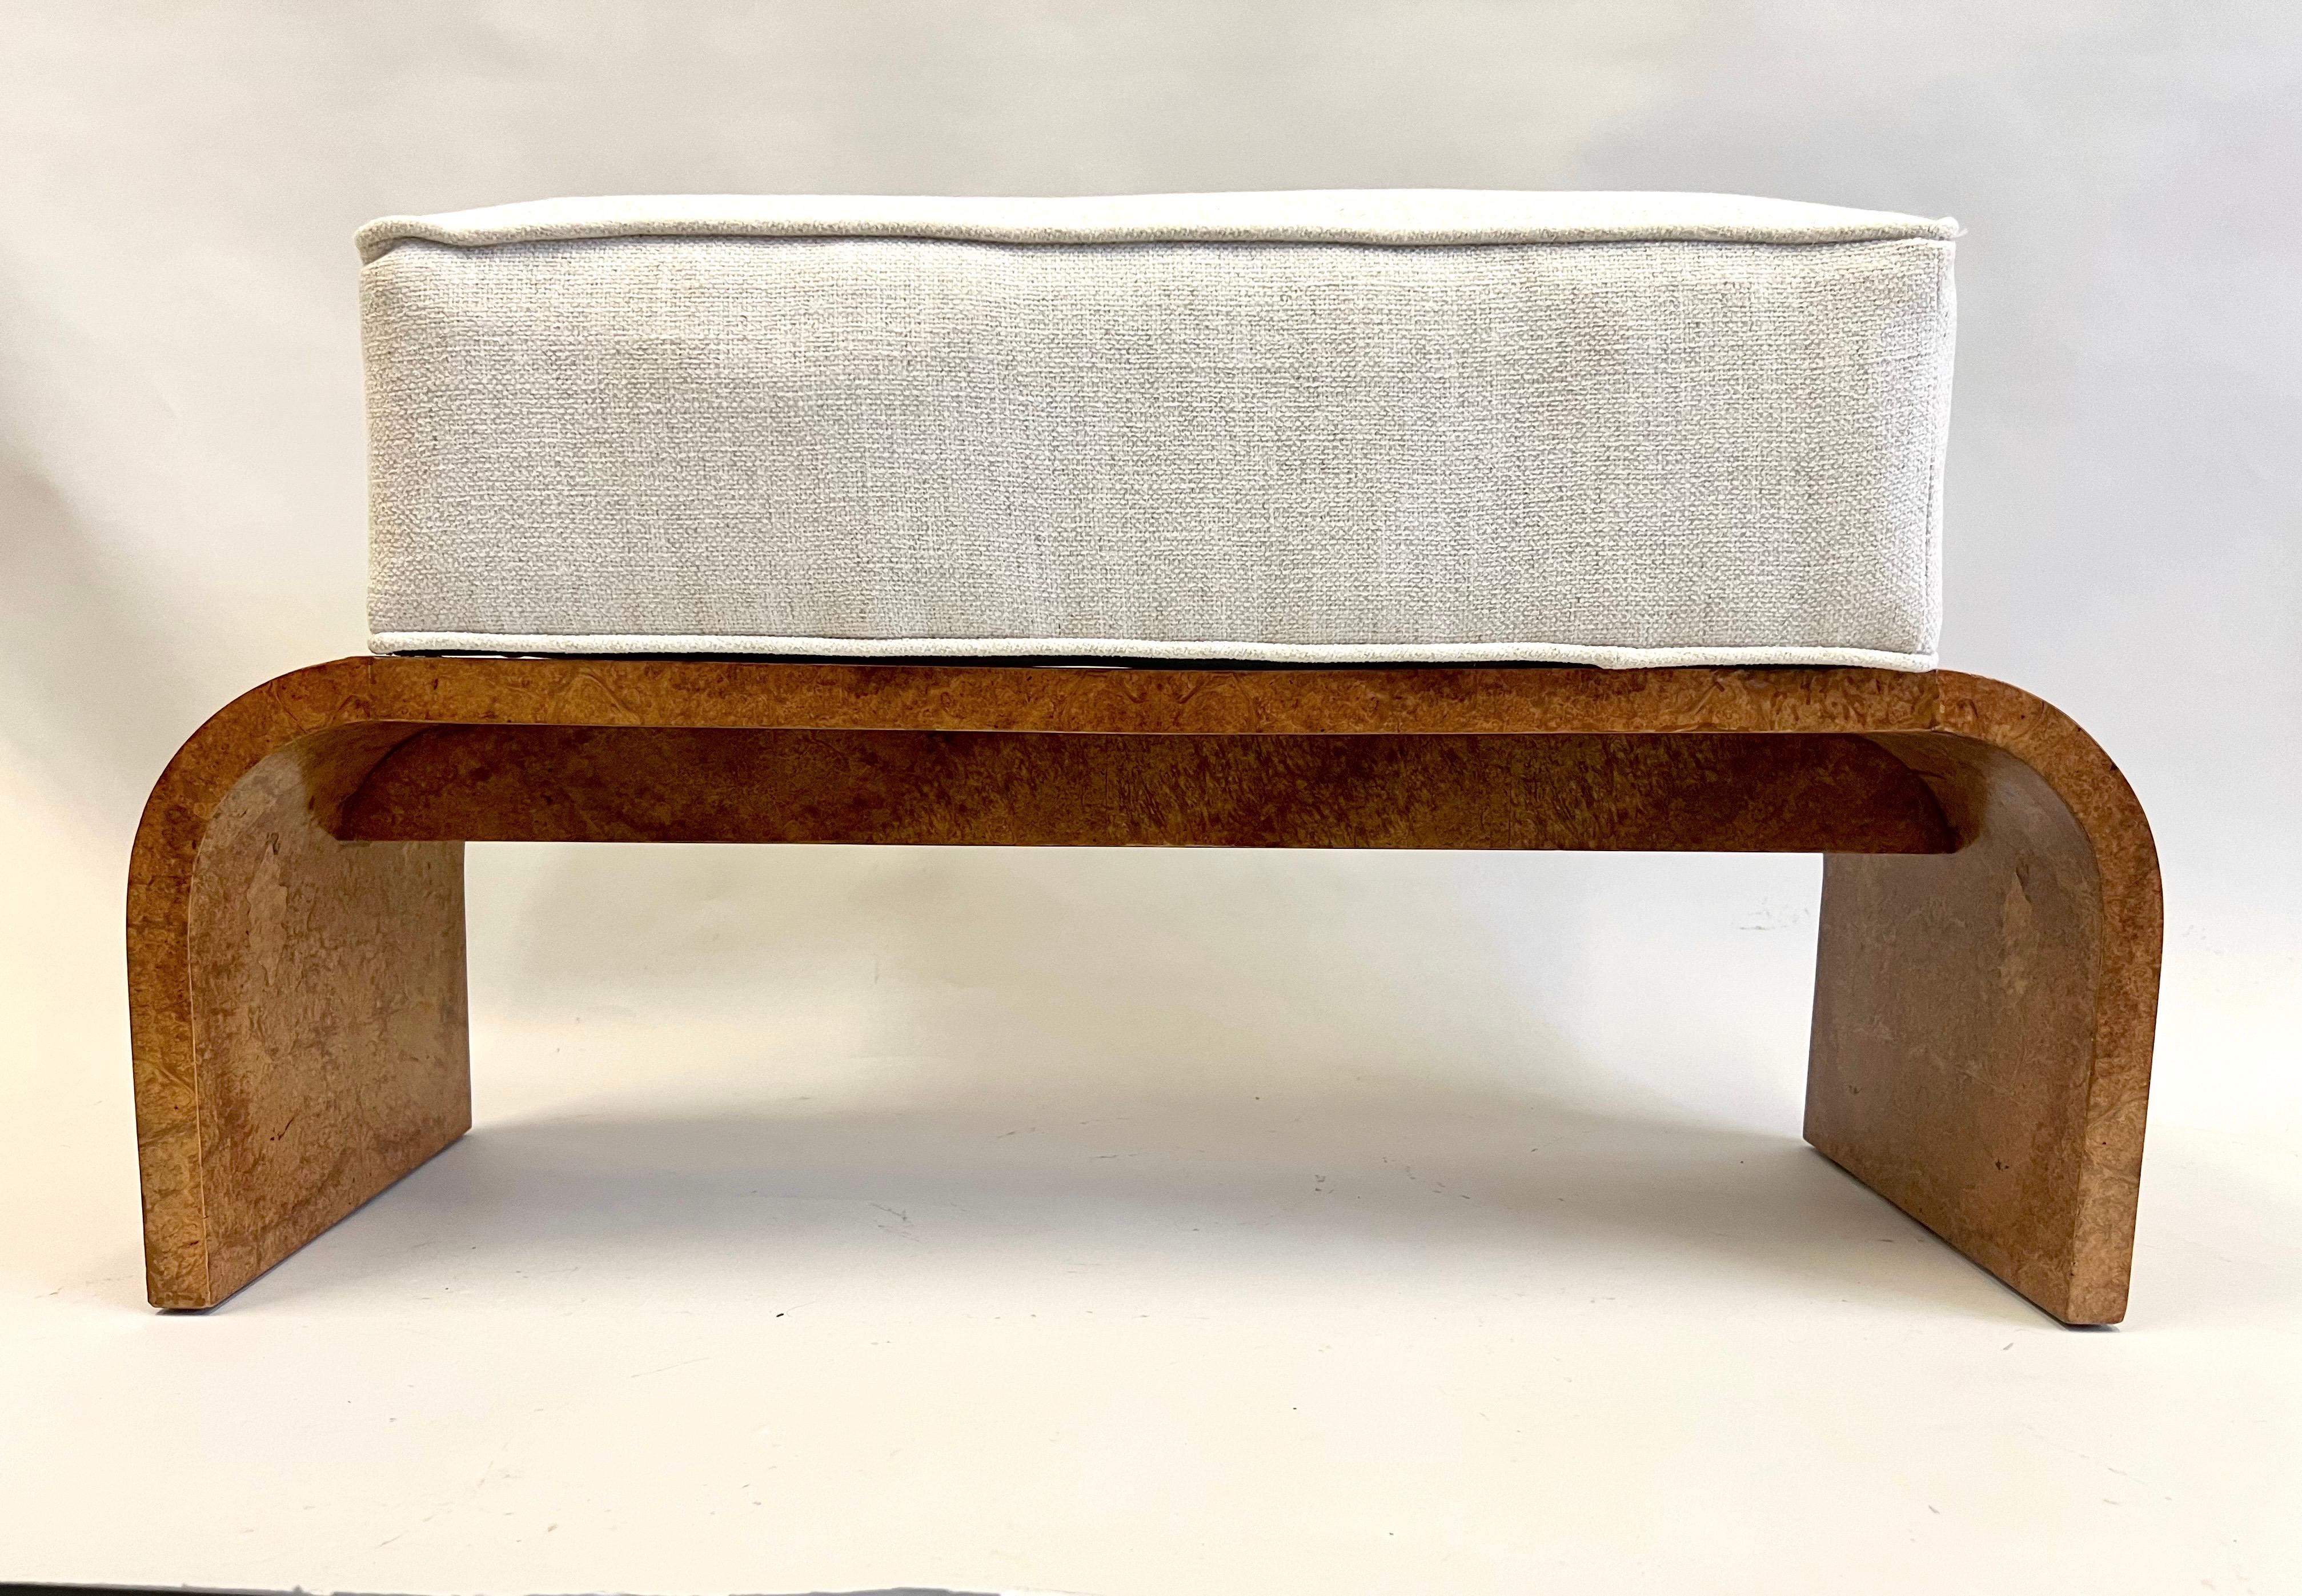 French Art Deco Burled Walnut Bench by Michel Roux-Spitz circa 1925 In Good Condition For Sale In New York, NY